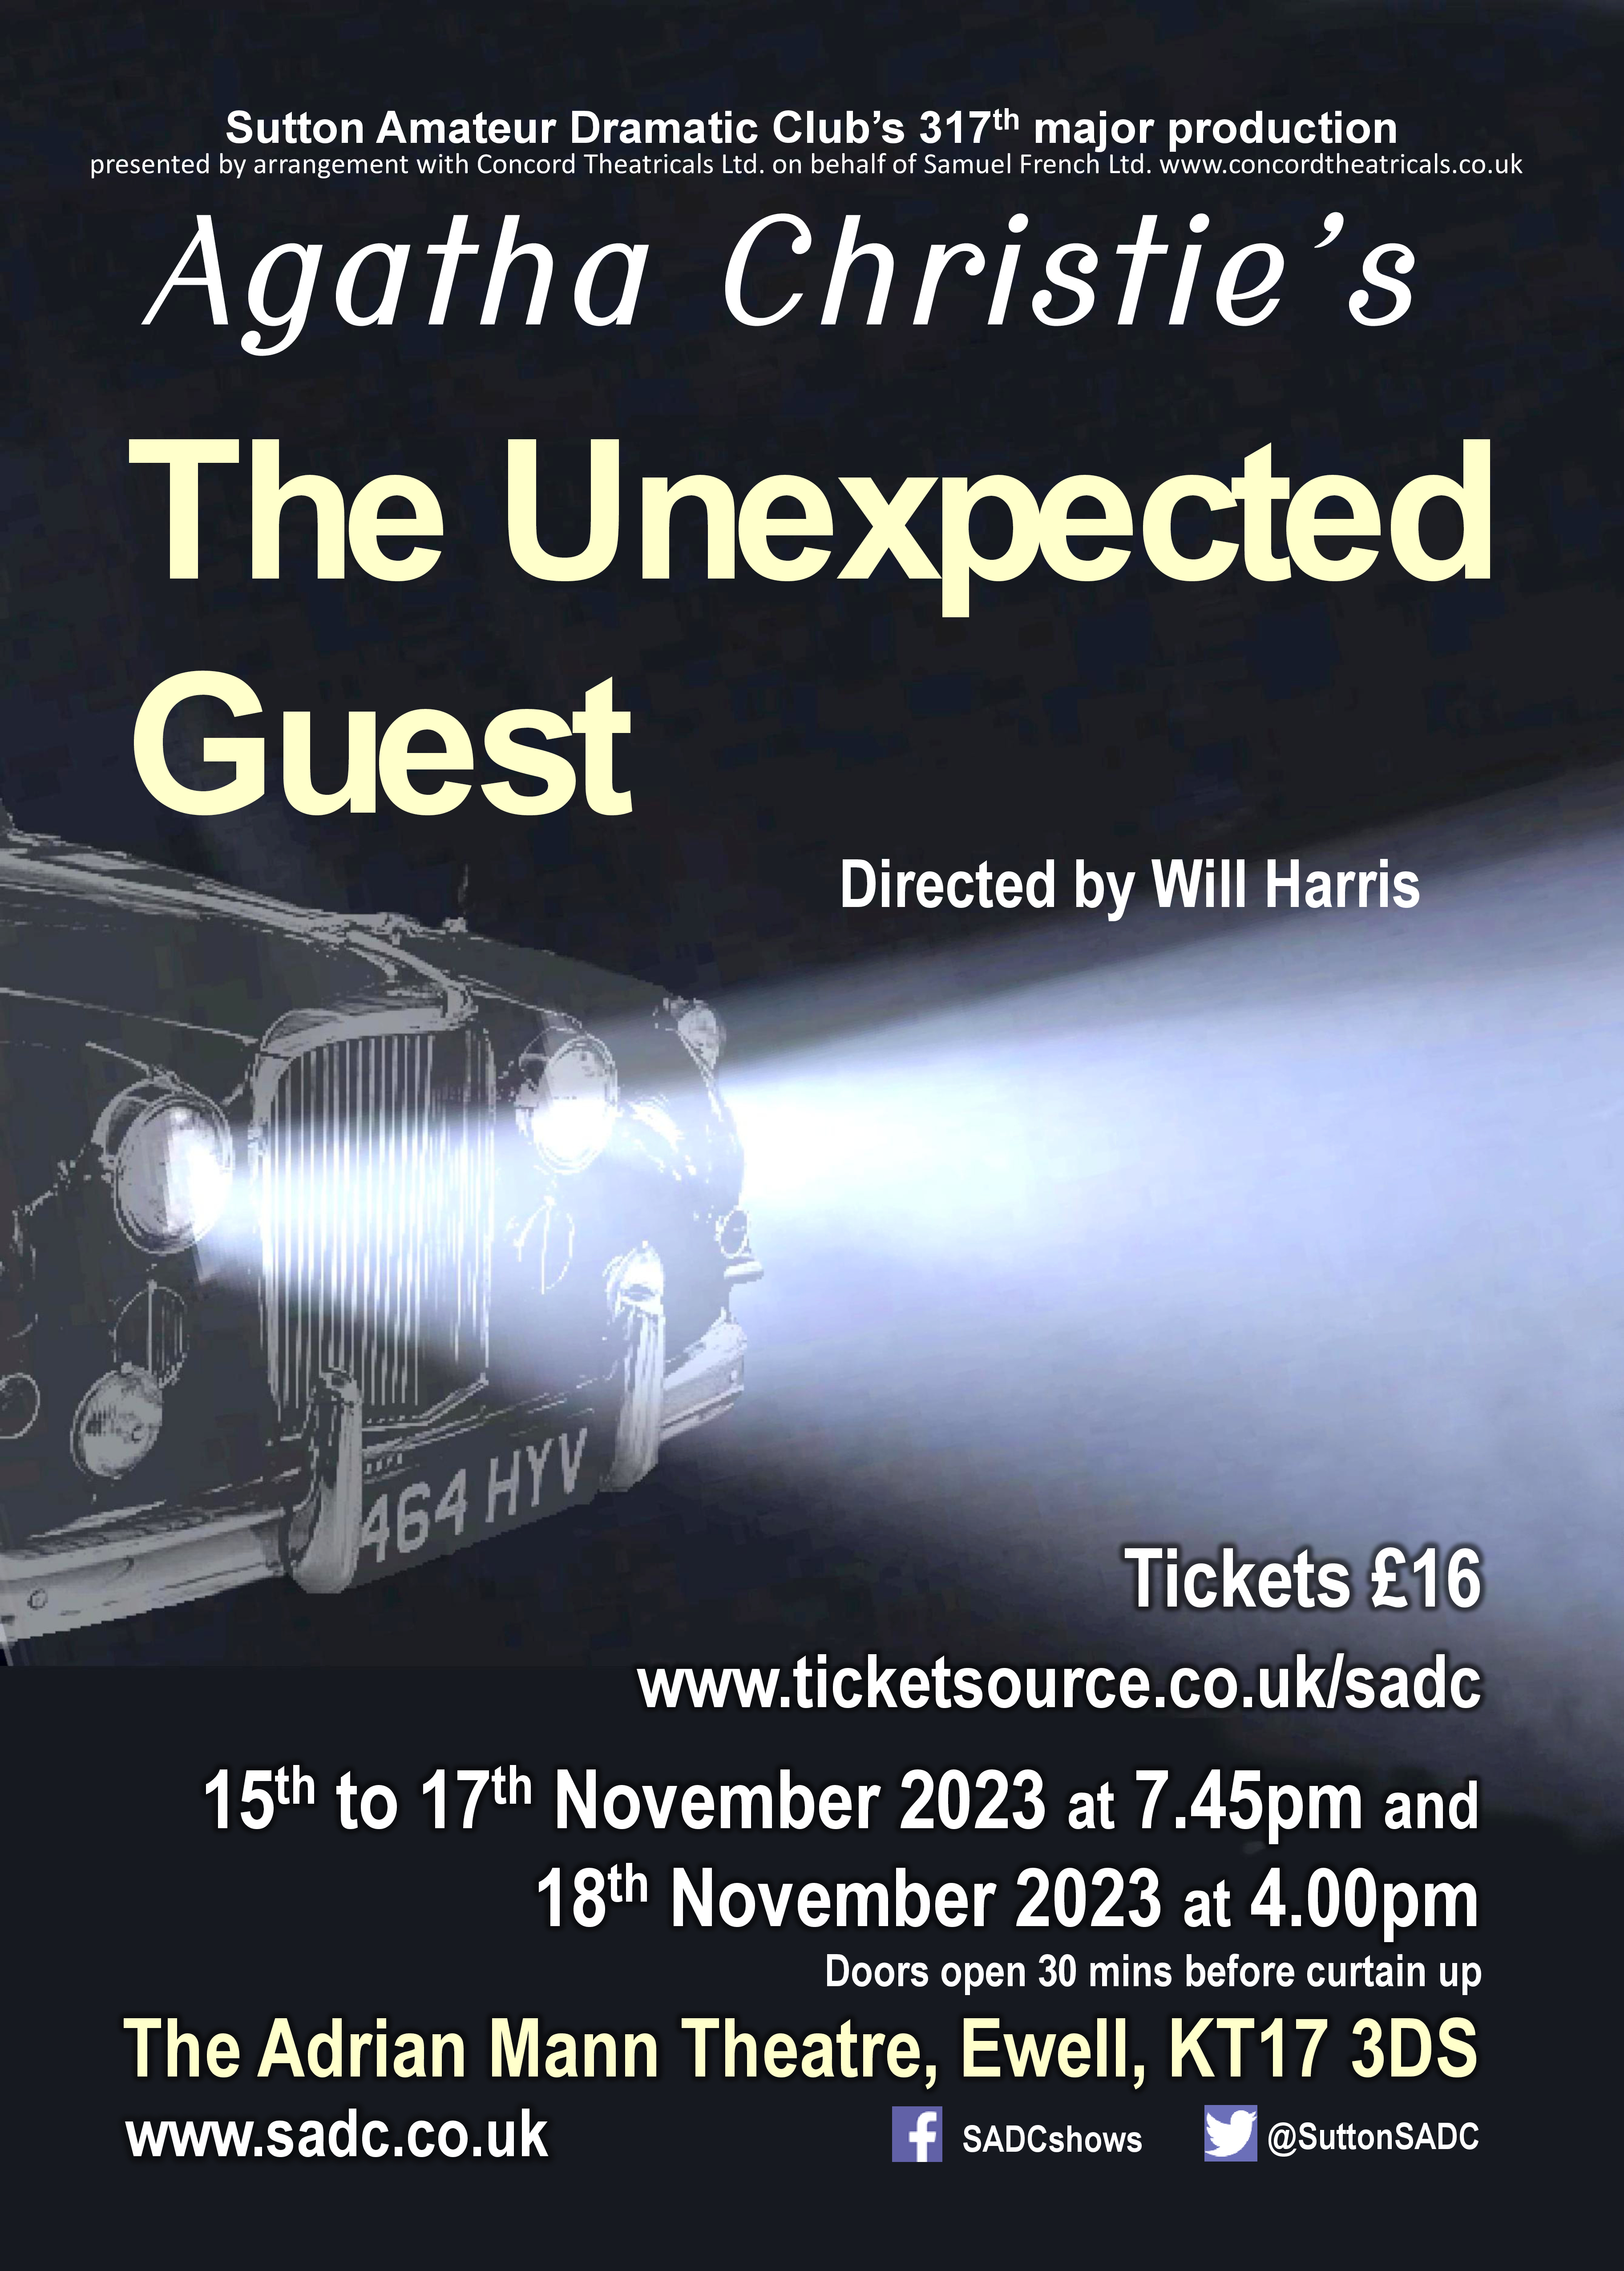 Poster image for The Unexpected Guest by Agatha Christie - a car's headlights loom out of the fog